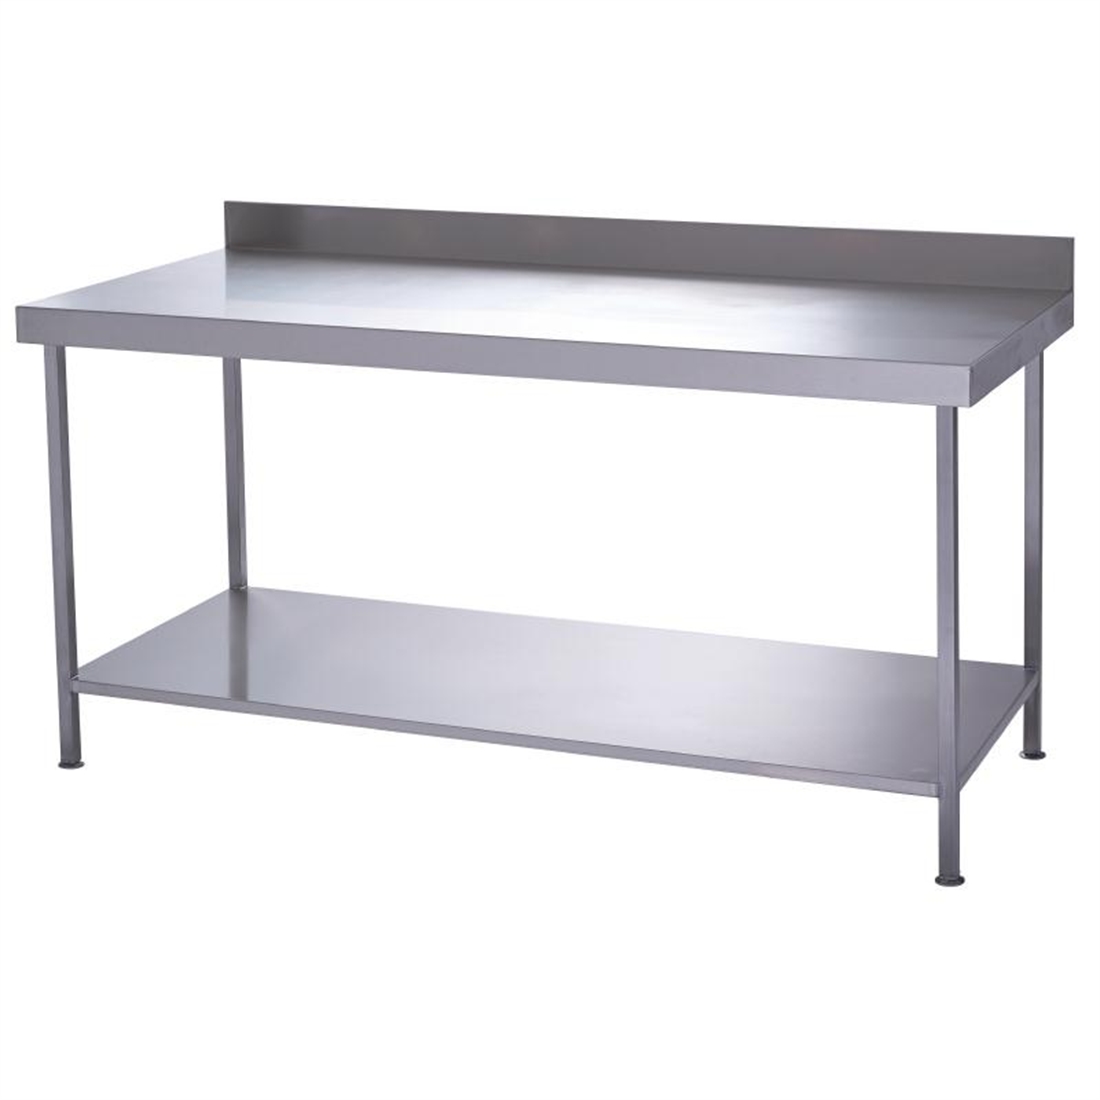 Parry Fully Welded Stainless Steel Wall Table with Undershelf 600x700mm